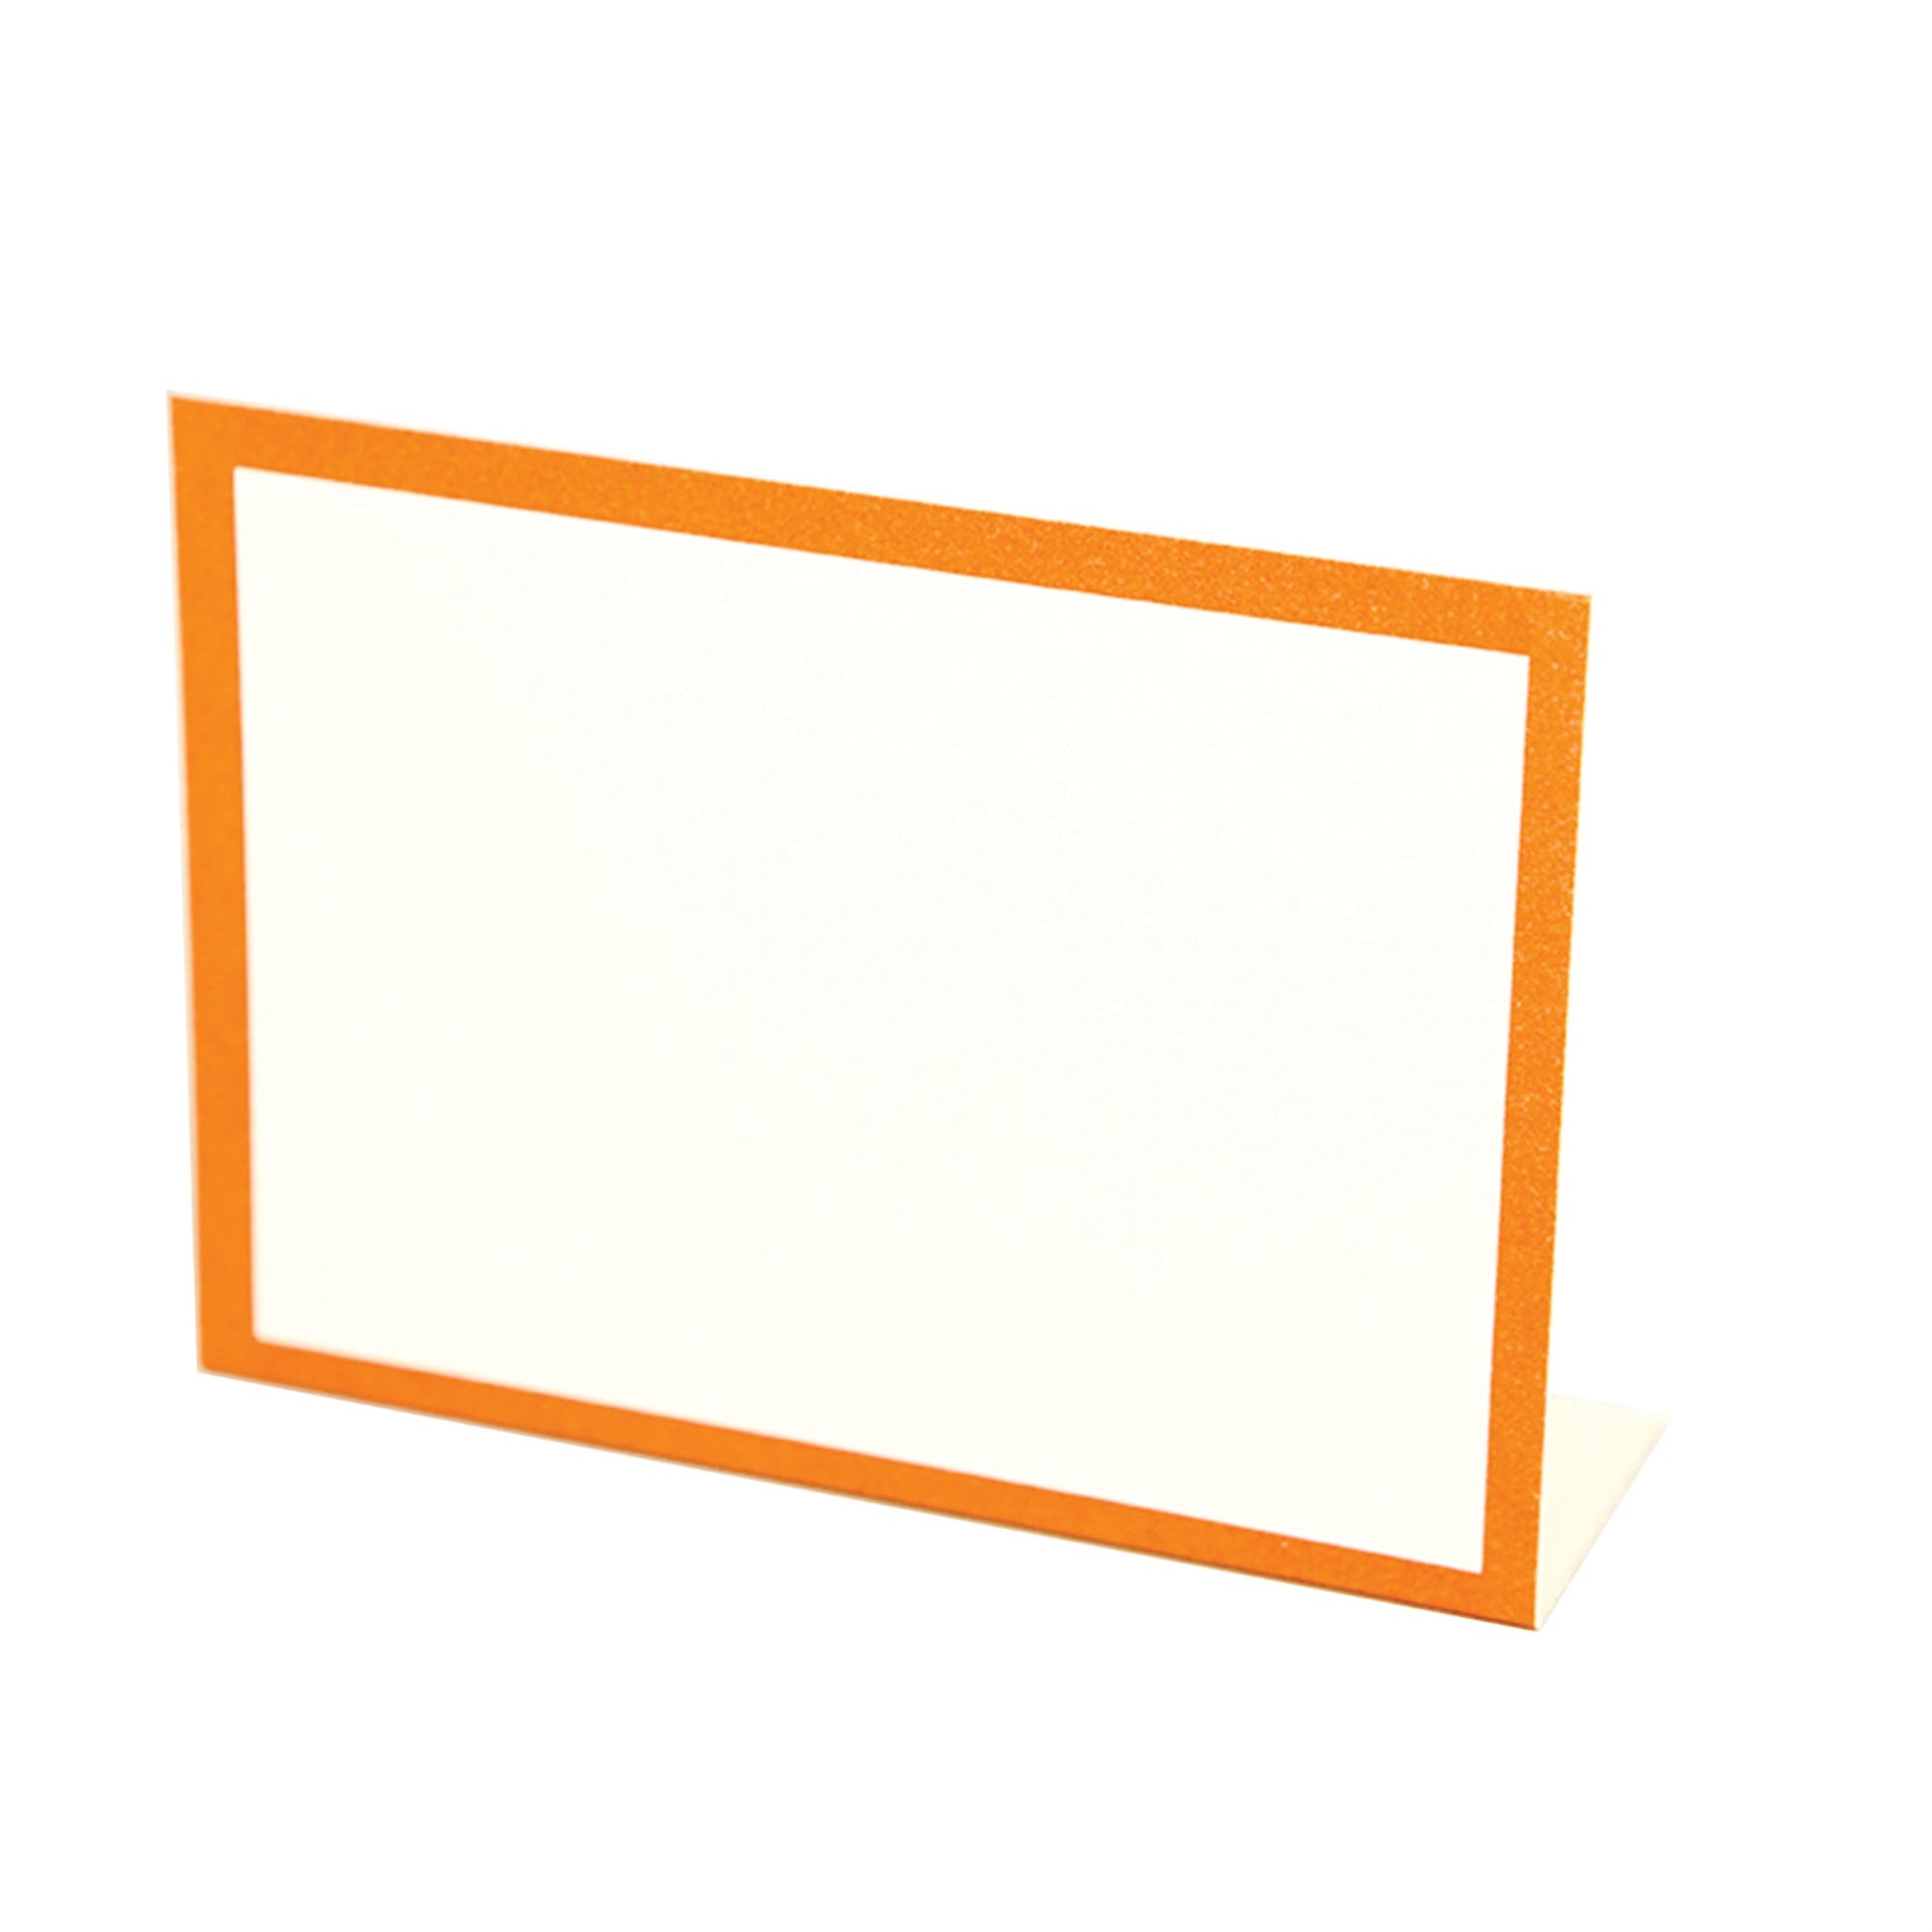 A square white place card with an orange boarder leaving a clear space for writing your guest name. These are a perfect place card to go with the Orange Slice Paper Placemat 